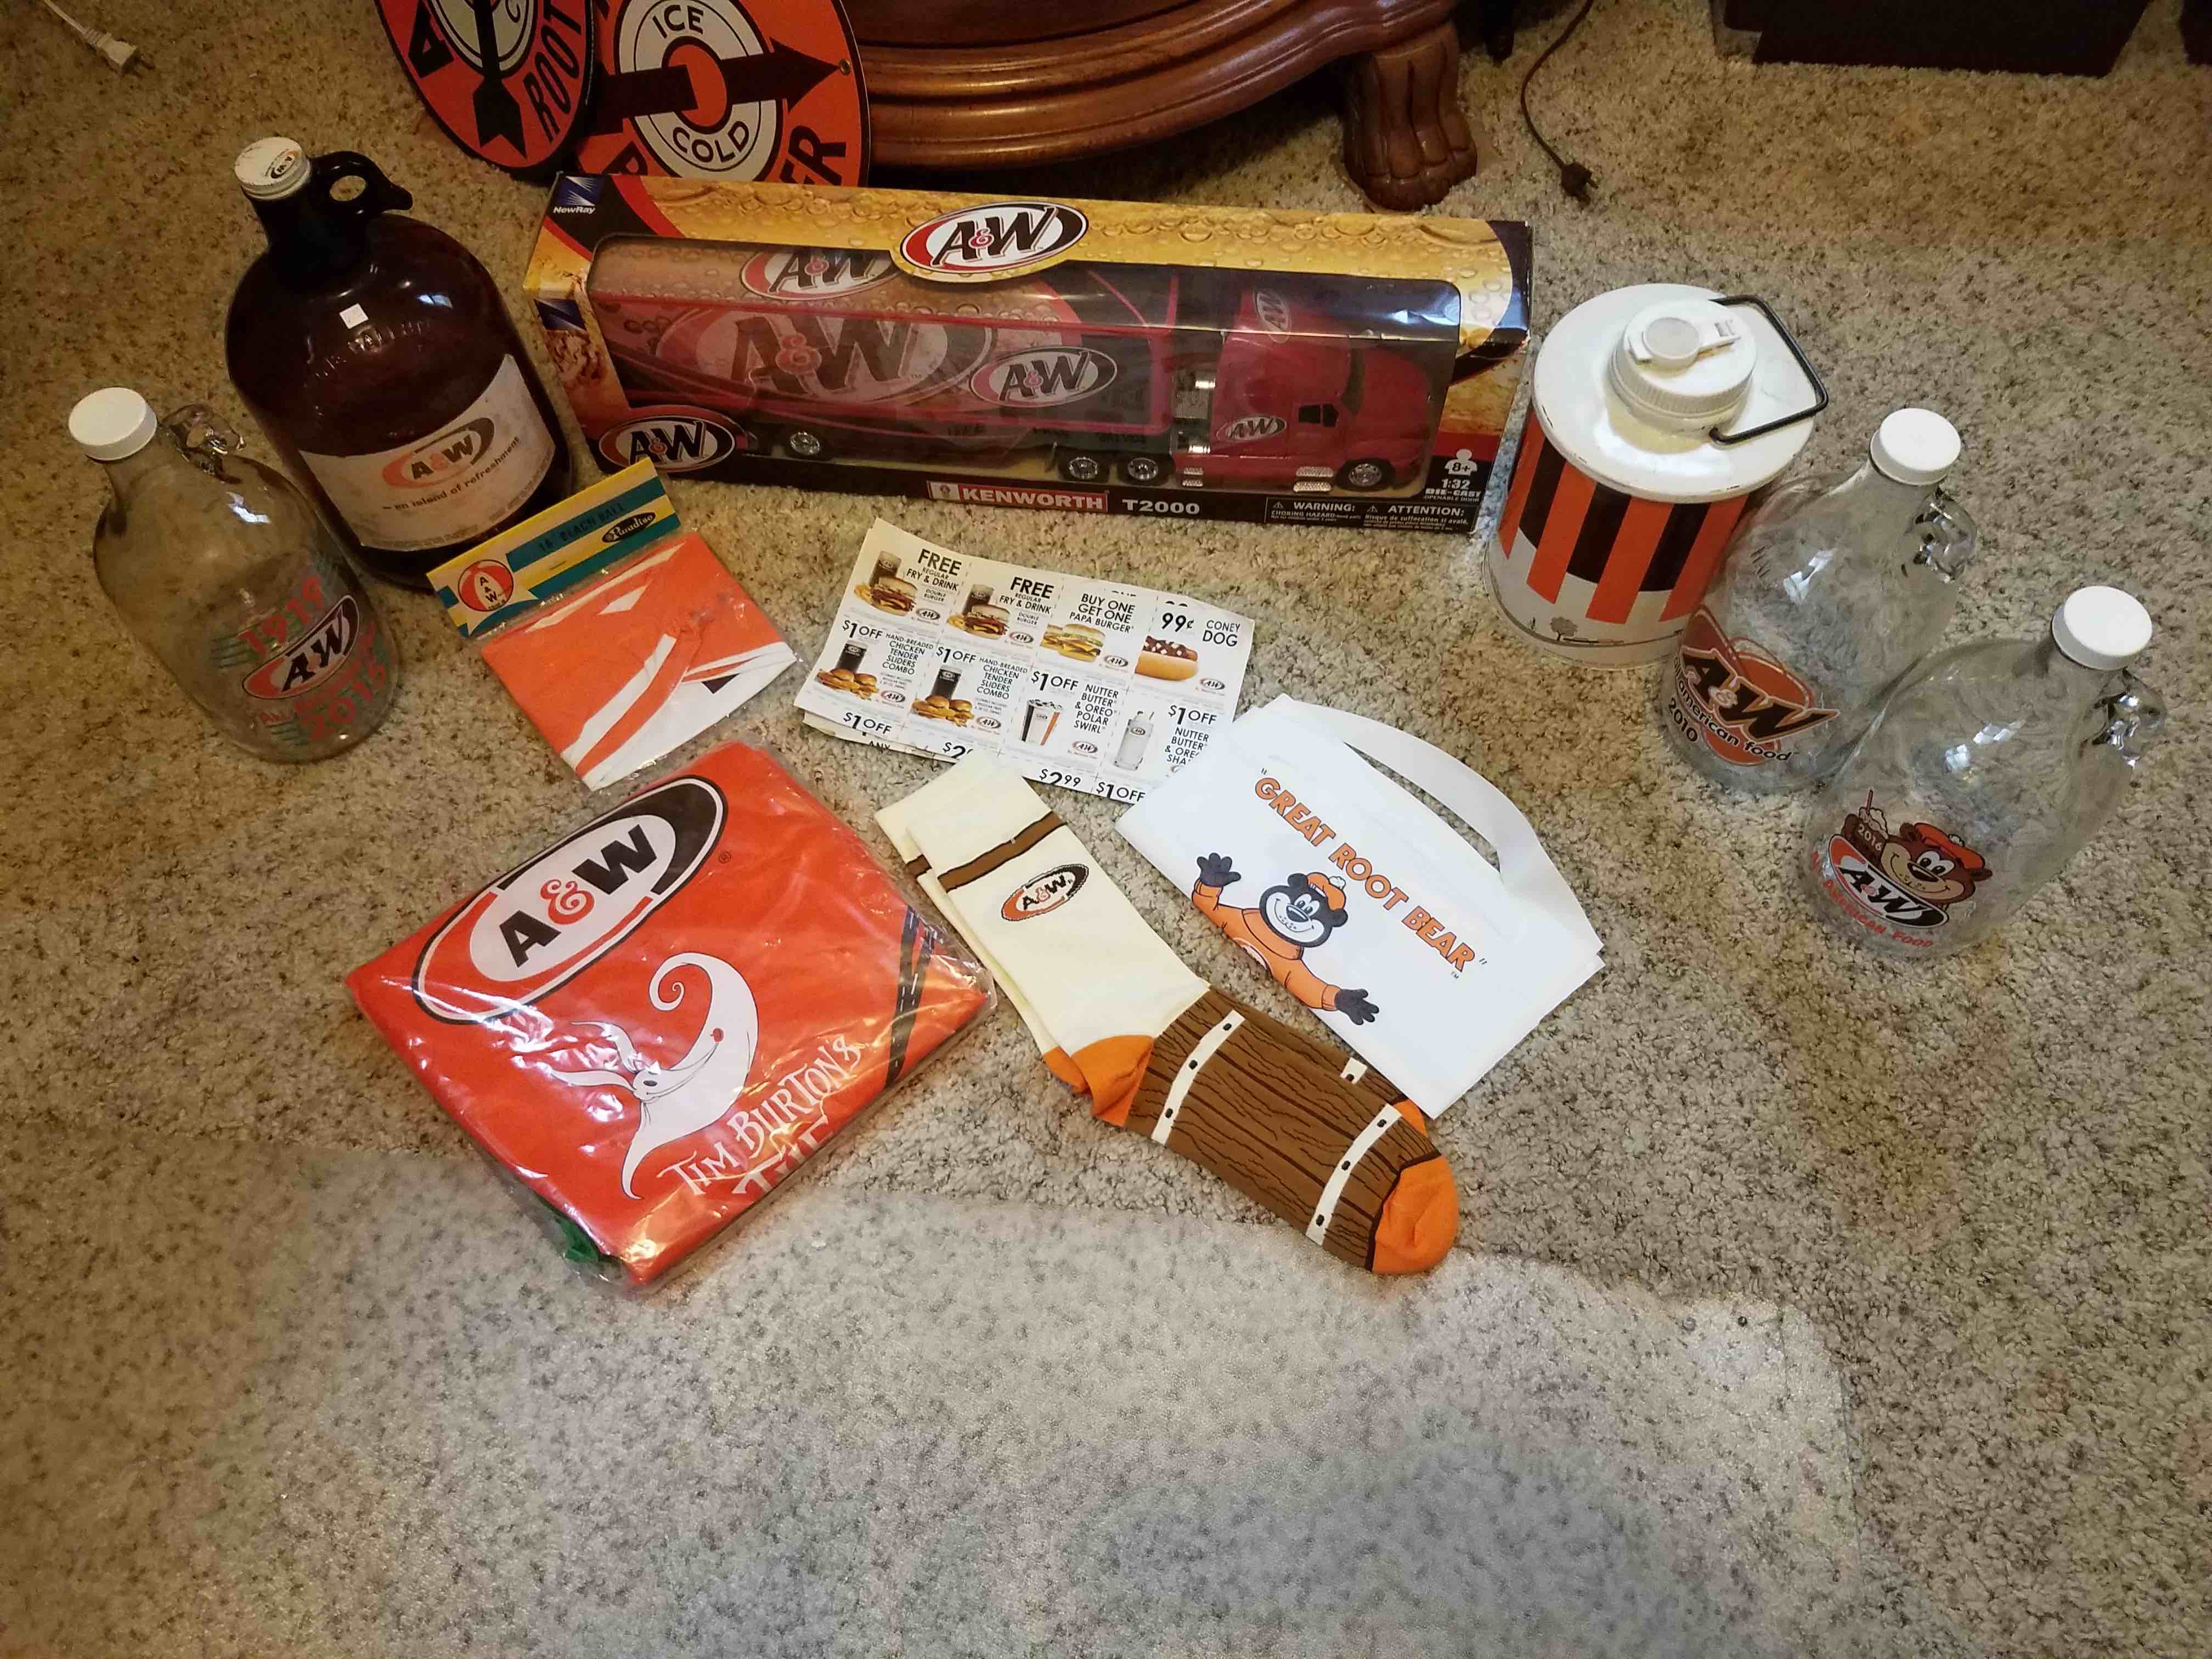 Overheard photo of various A&W Restaurants memorabilia from over the years.